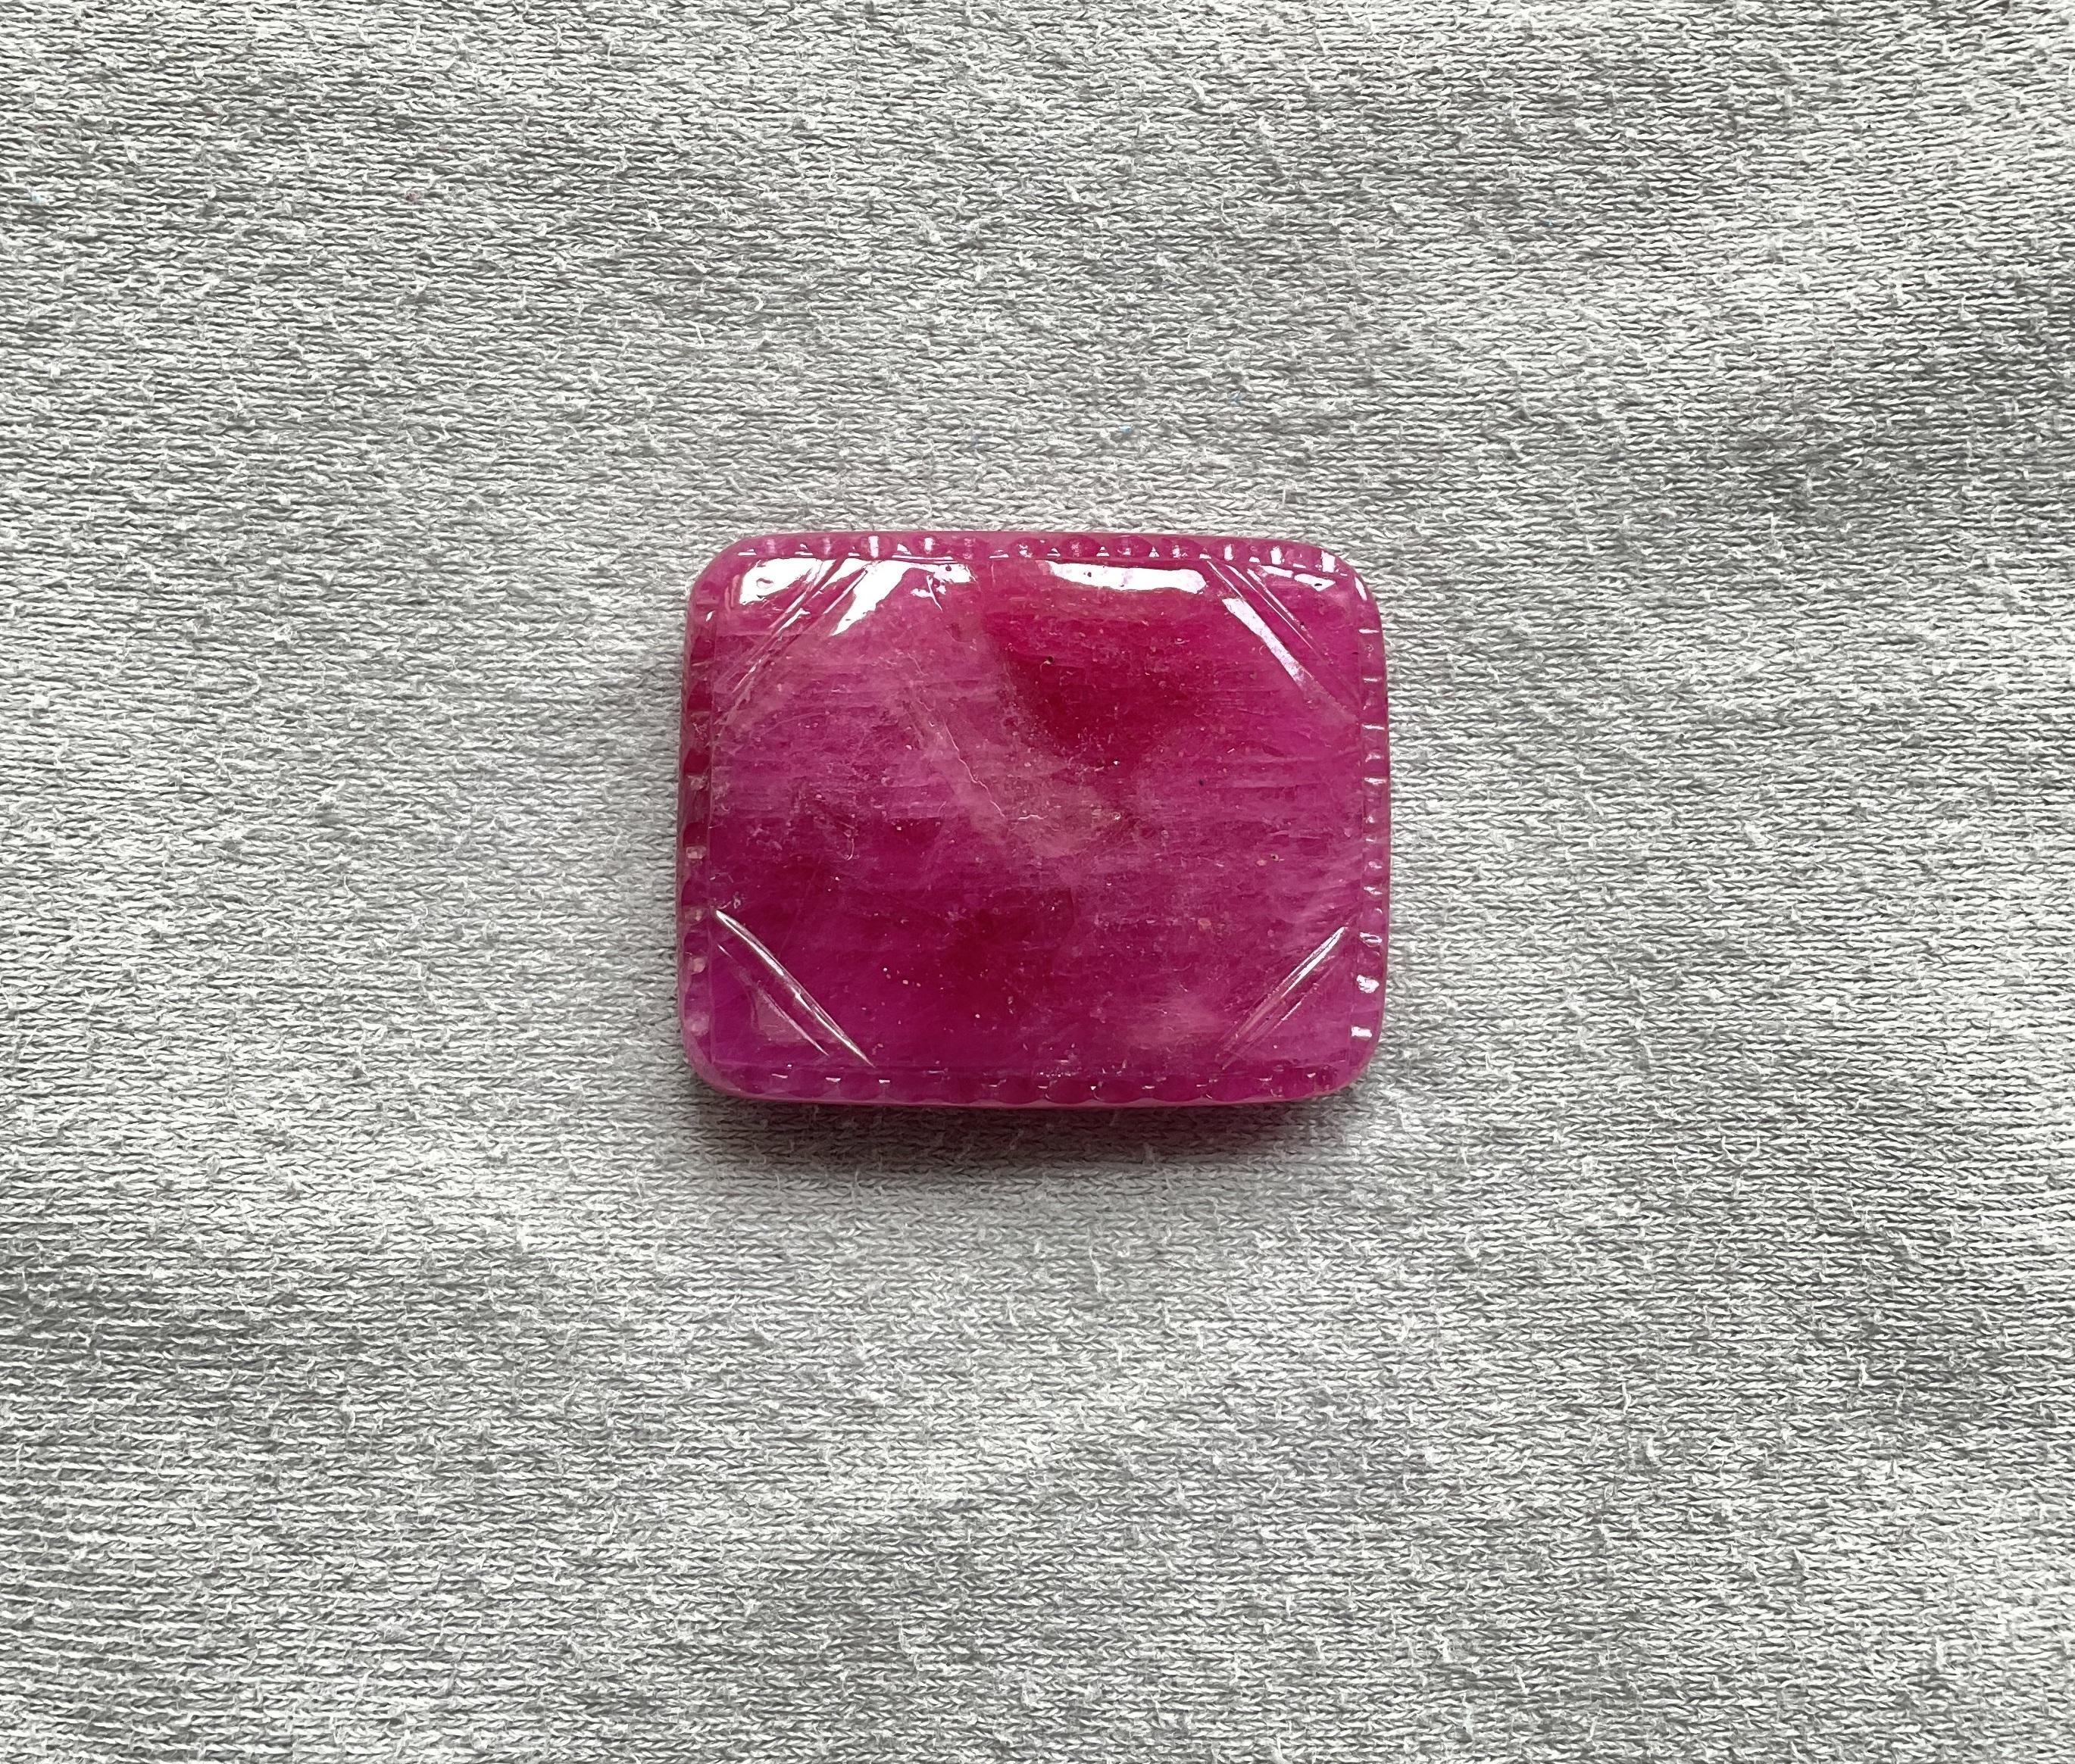 Certified 89.35 Carats Ruby Mozambique Carved Specimen Heated For Fine Jewelry

Gemstone - Ruby
Weight: 89.35 Carats
Pieces: 1
Shape: Carved Specimen